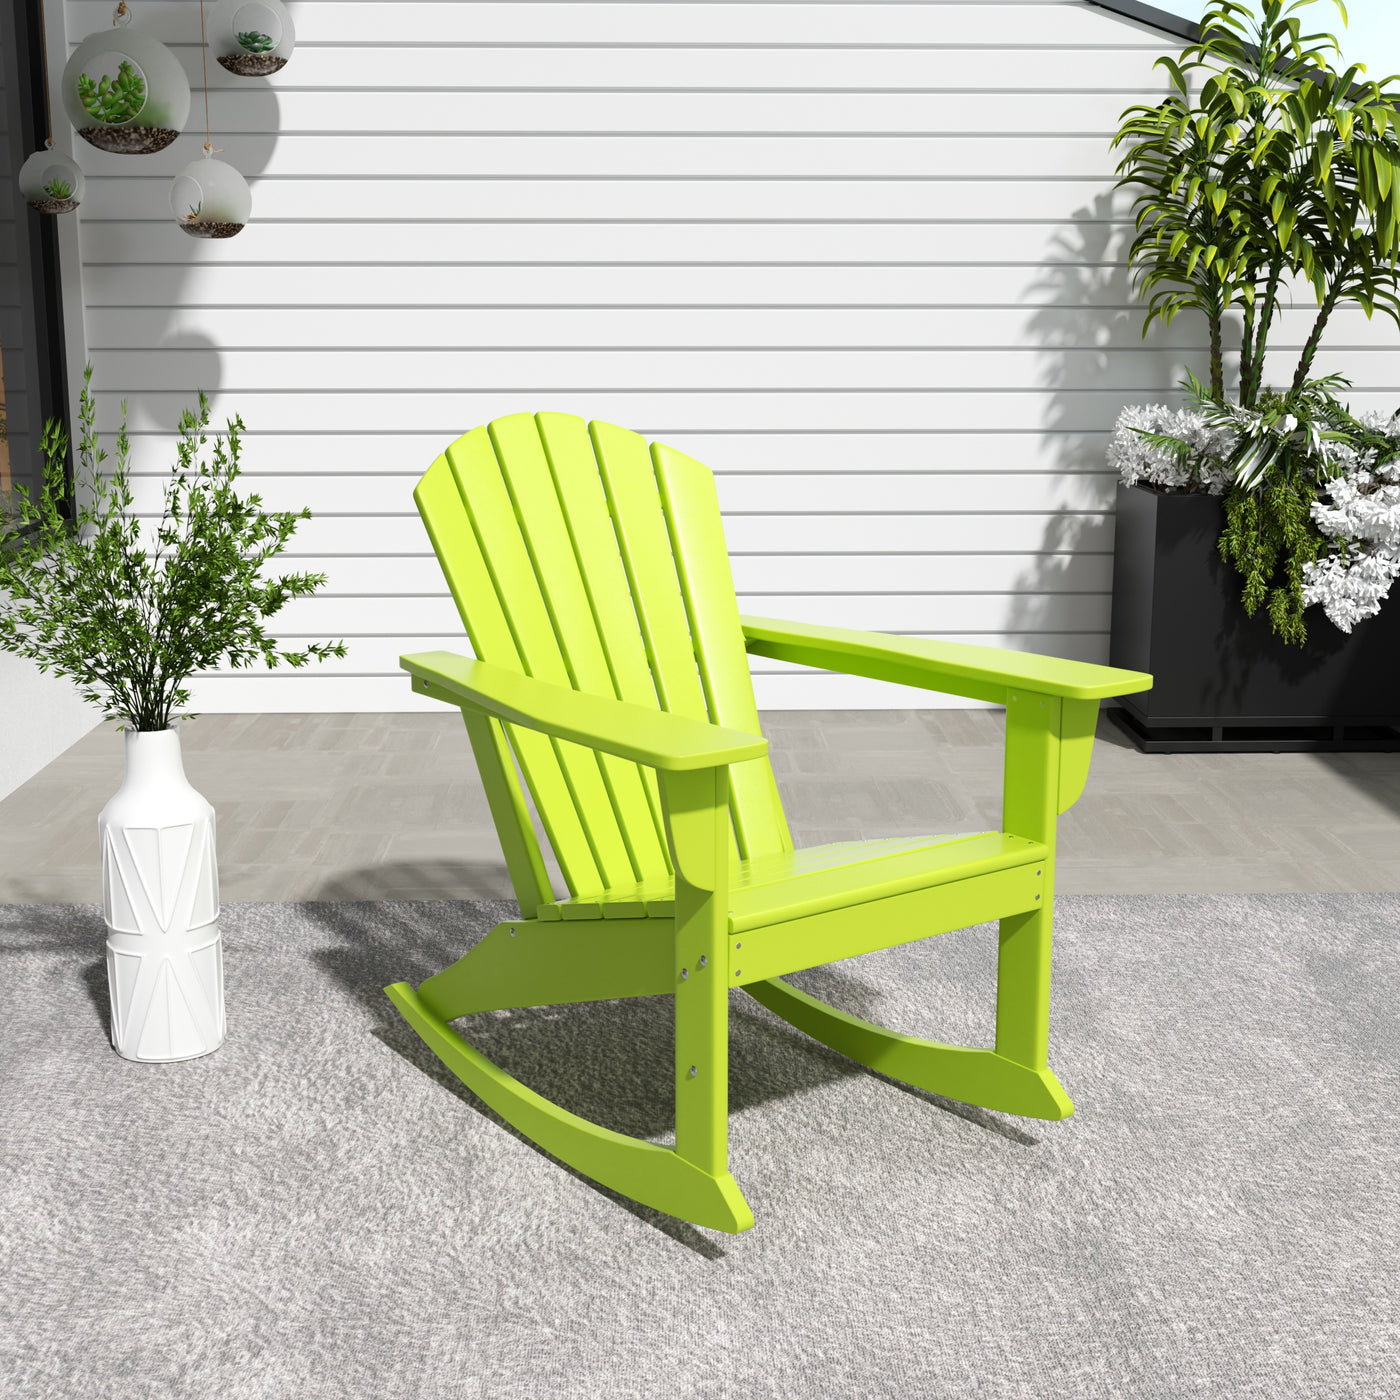 Dylan Outdoor Patio Poly Adirondack Rocking Chair